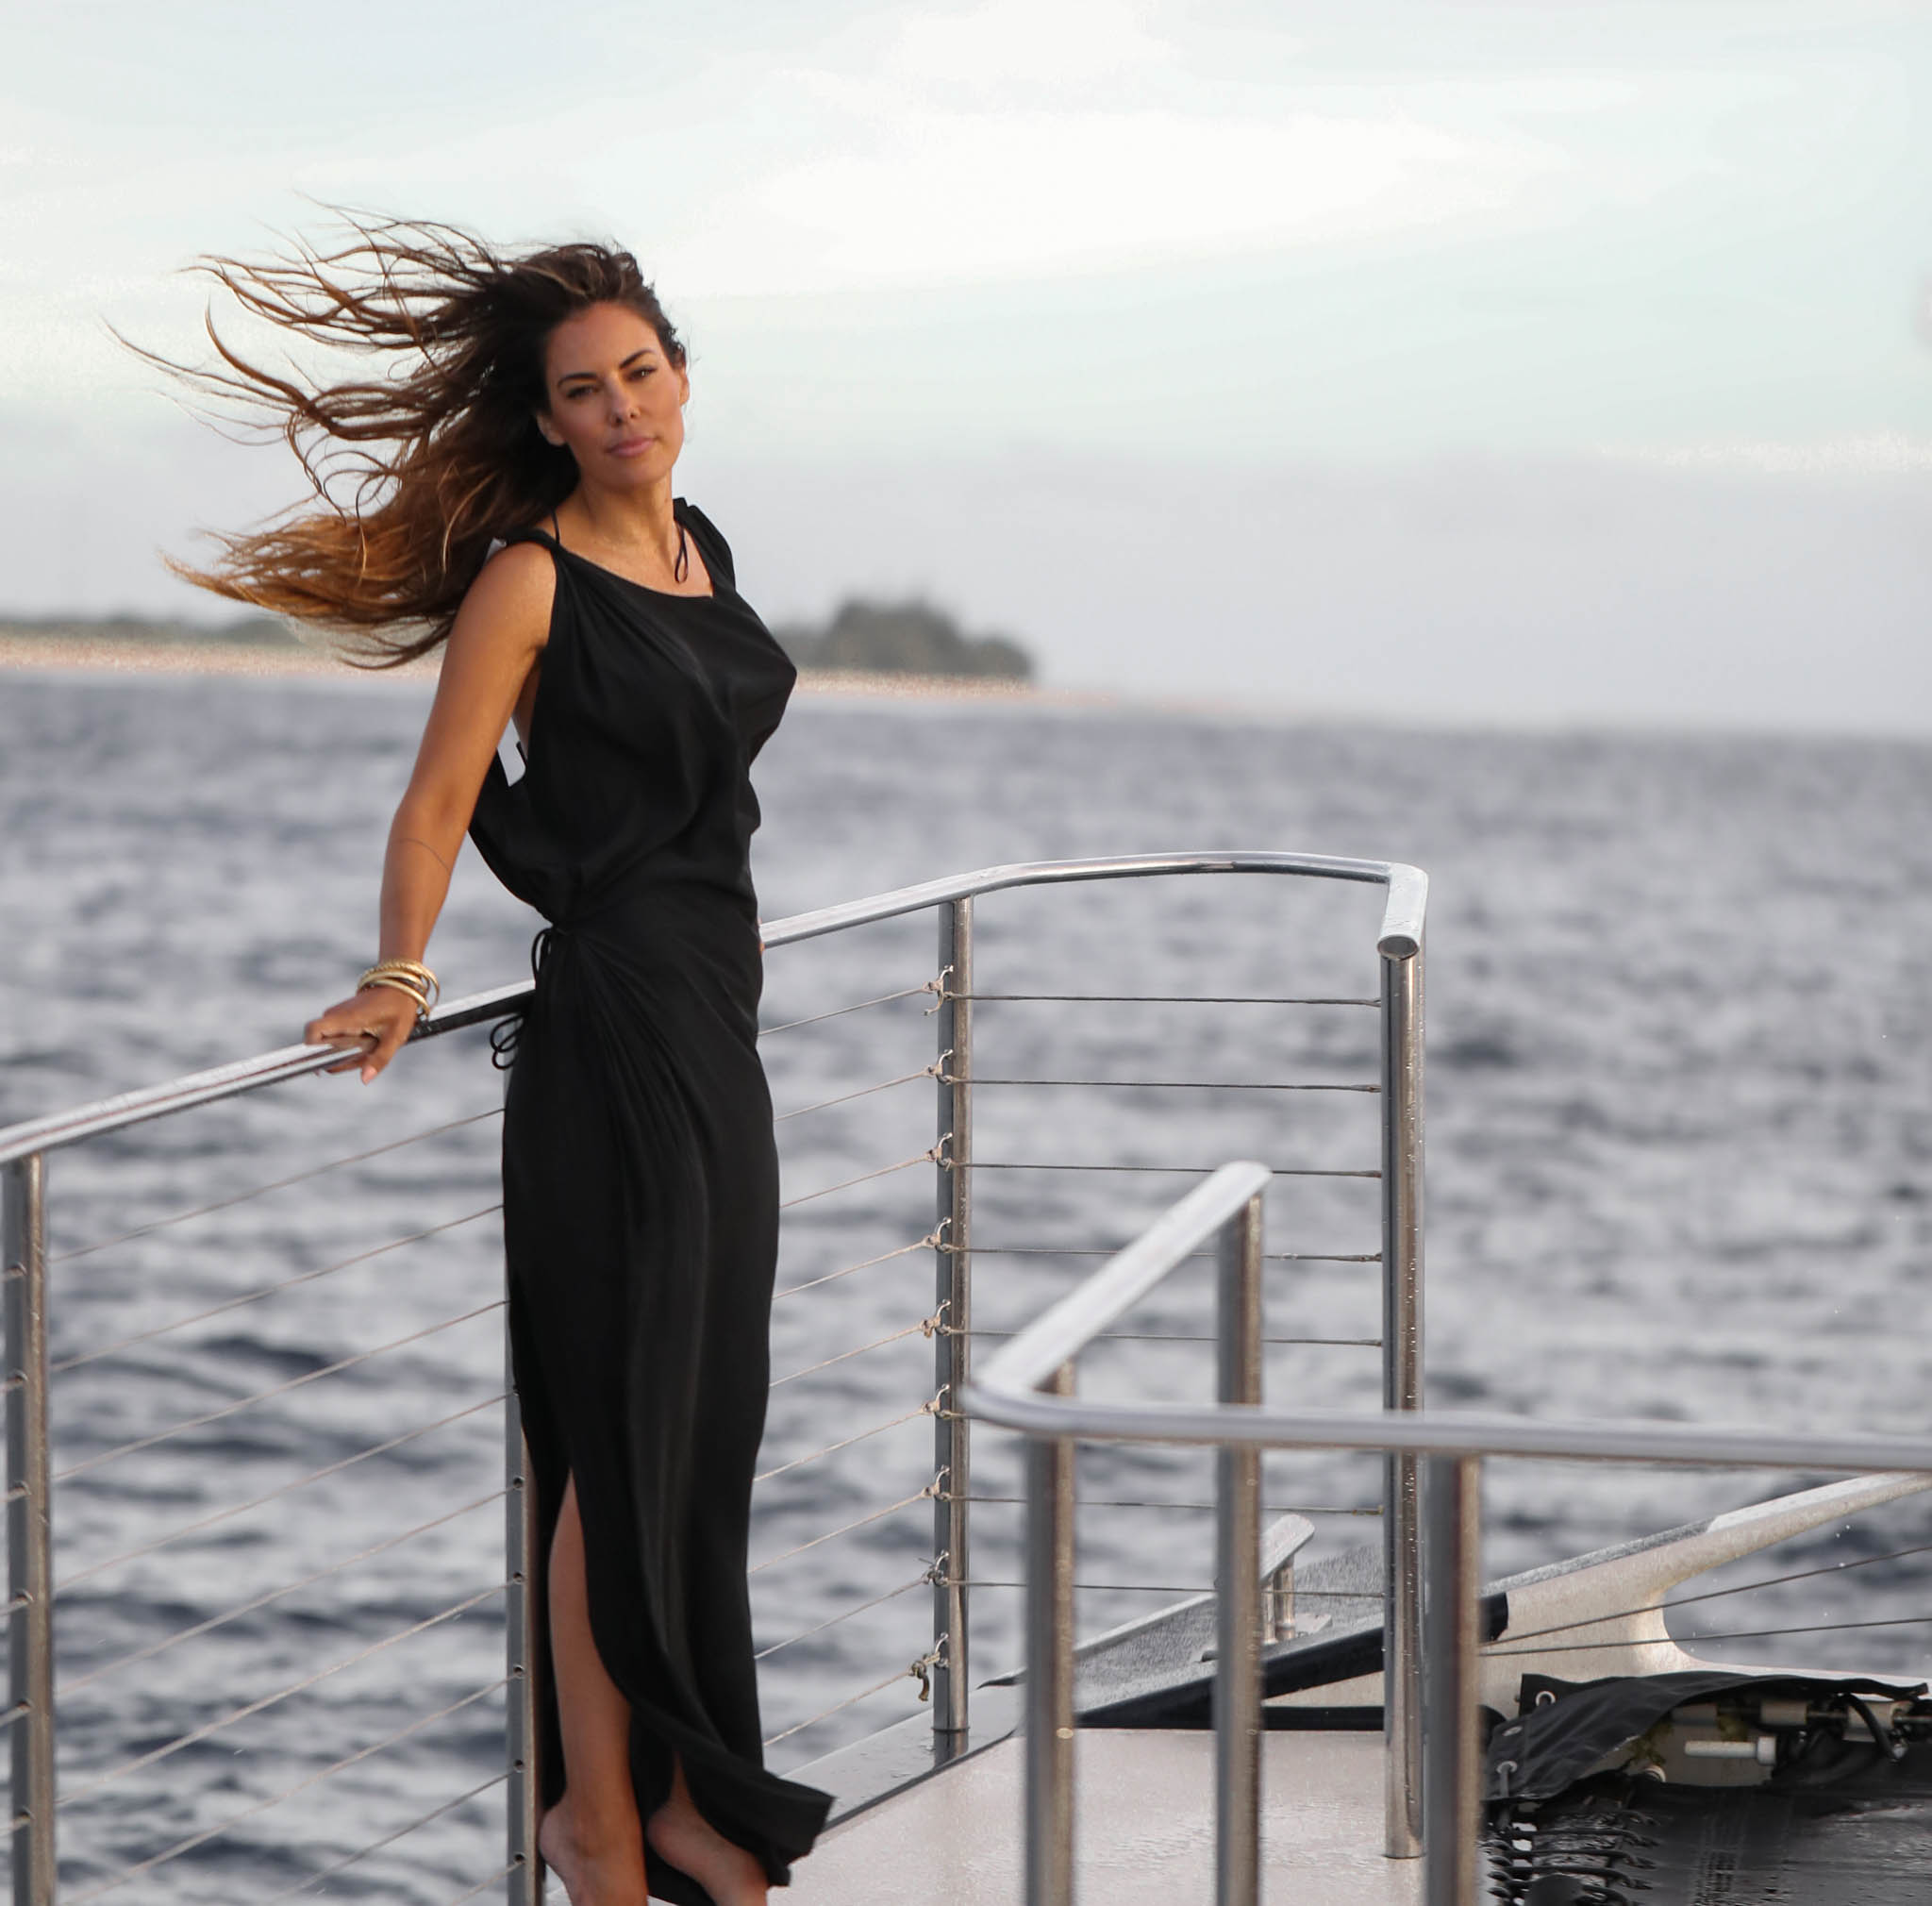 Chic Nautical Boating outfits for women 